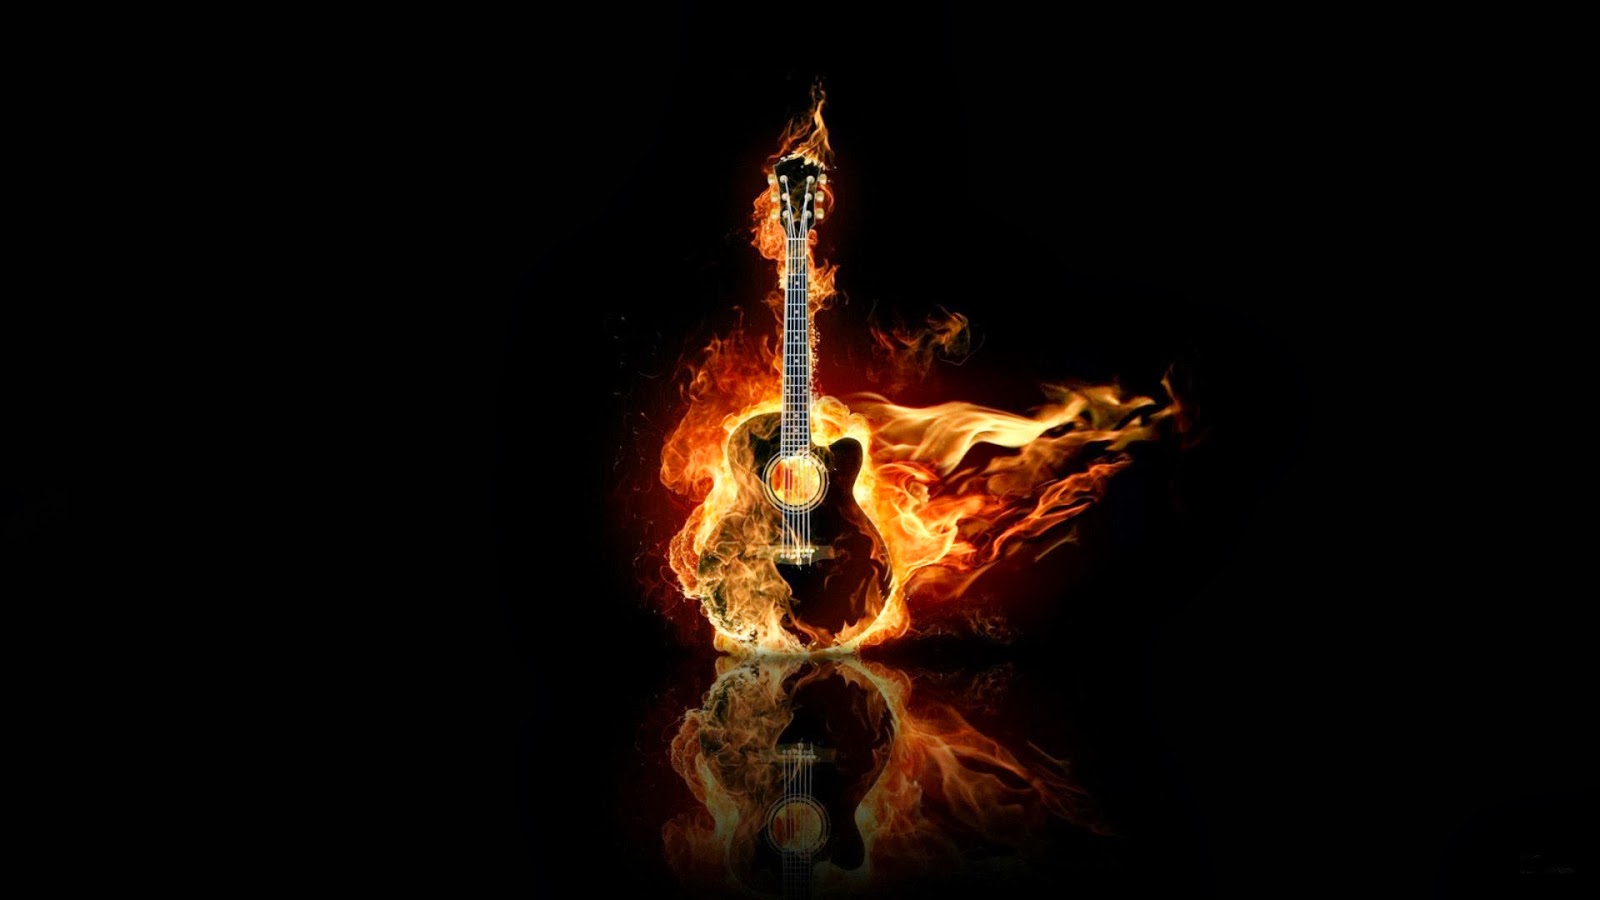 Abstract Hot Guitar On Fire HD Wallpaper Collection